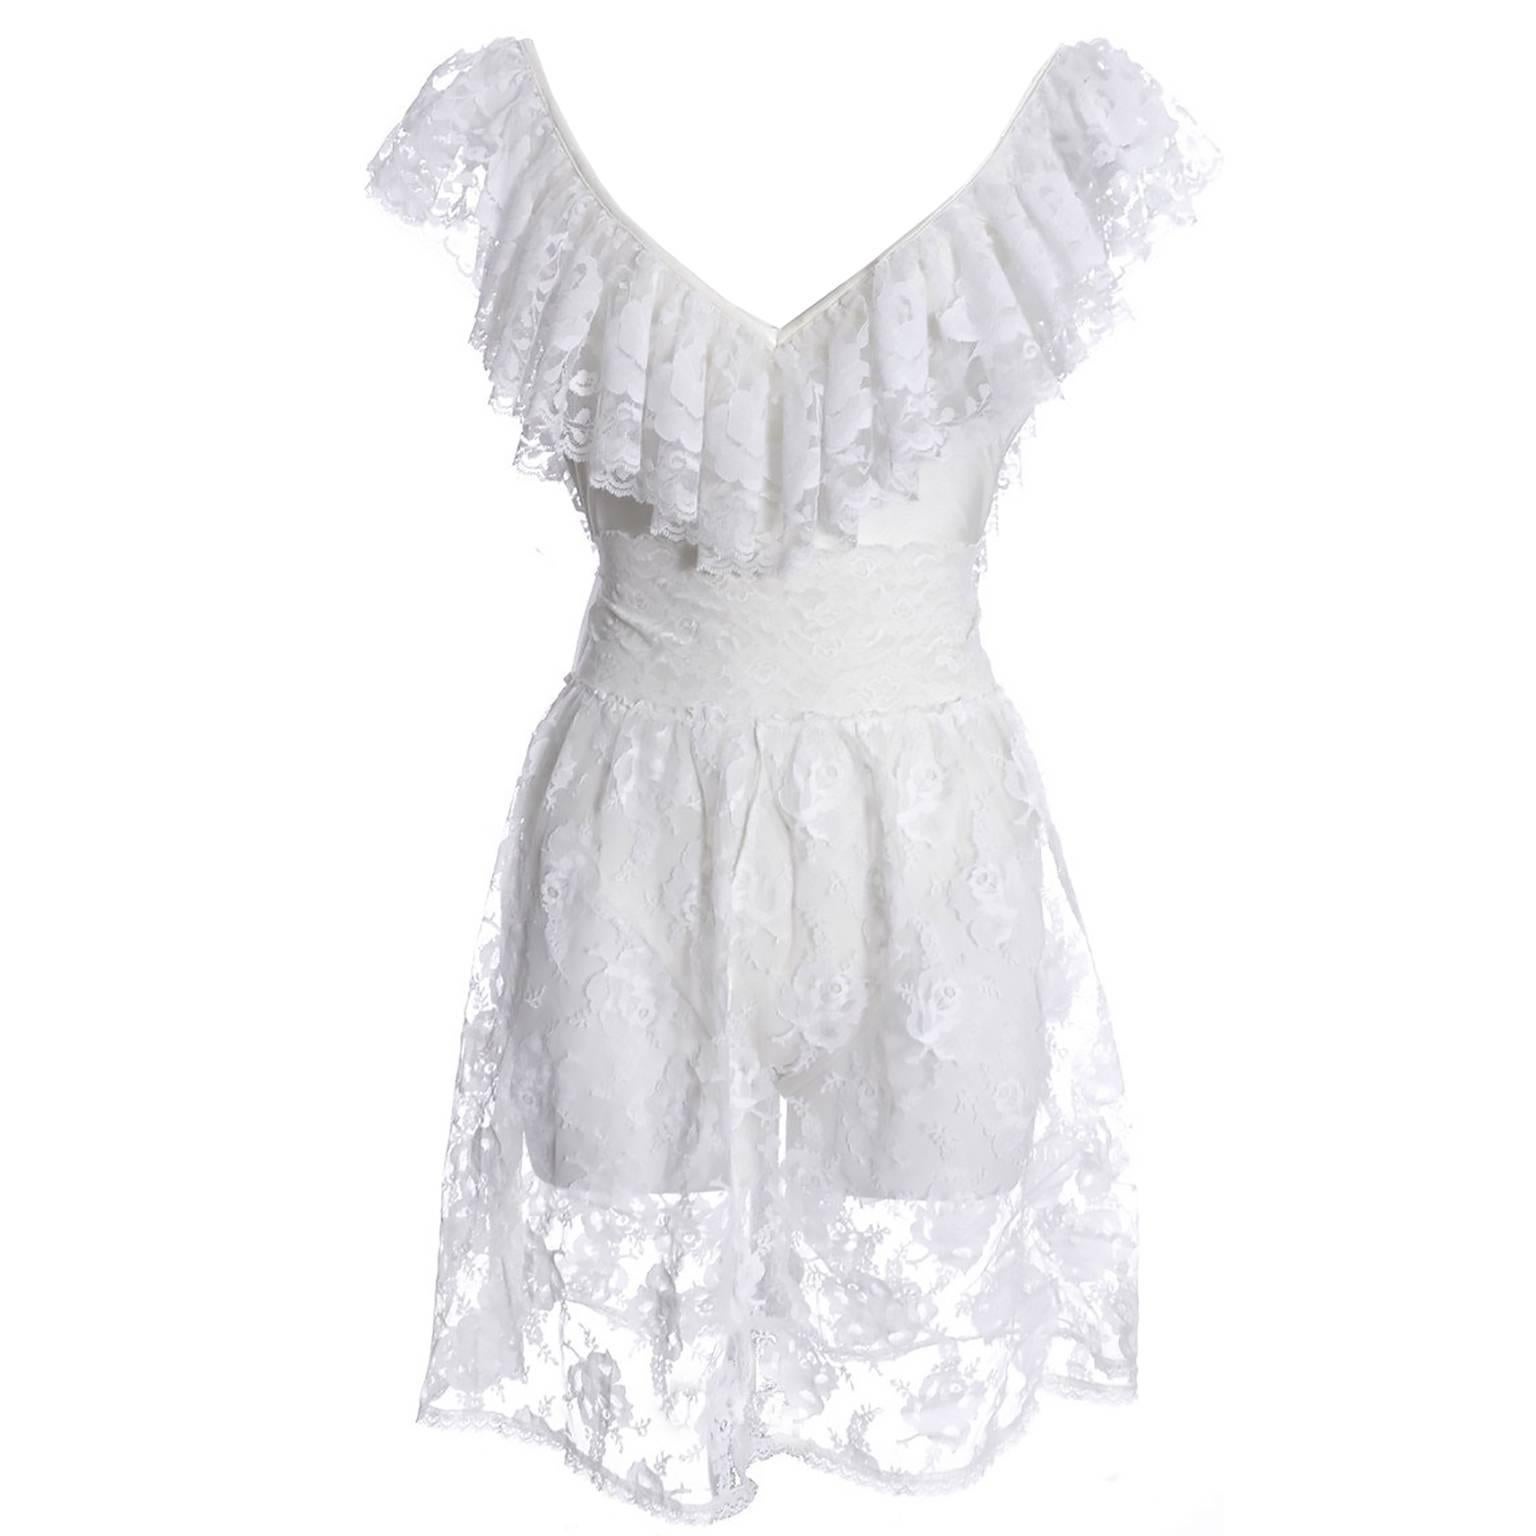 You will feel so glamorous in this fabulous one piece vintage Bill Blass swimsuit with its matching lace skirt! The swimsuit itself has beautiful white lace trim and the white lace over skirt is 21 inches long with a 26